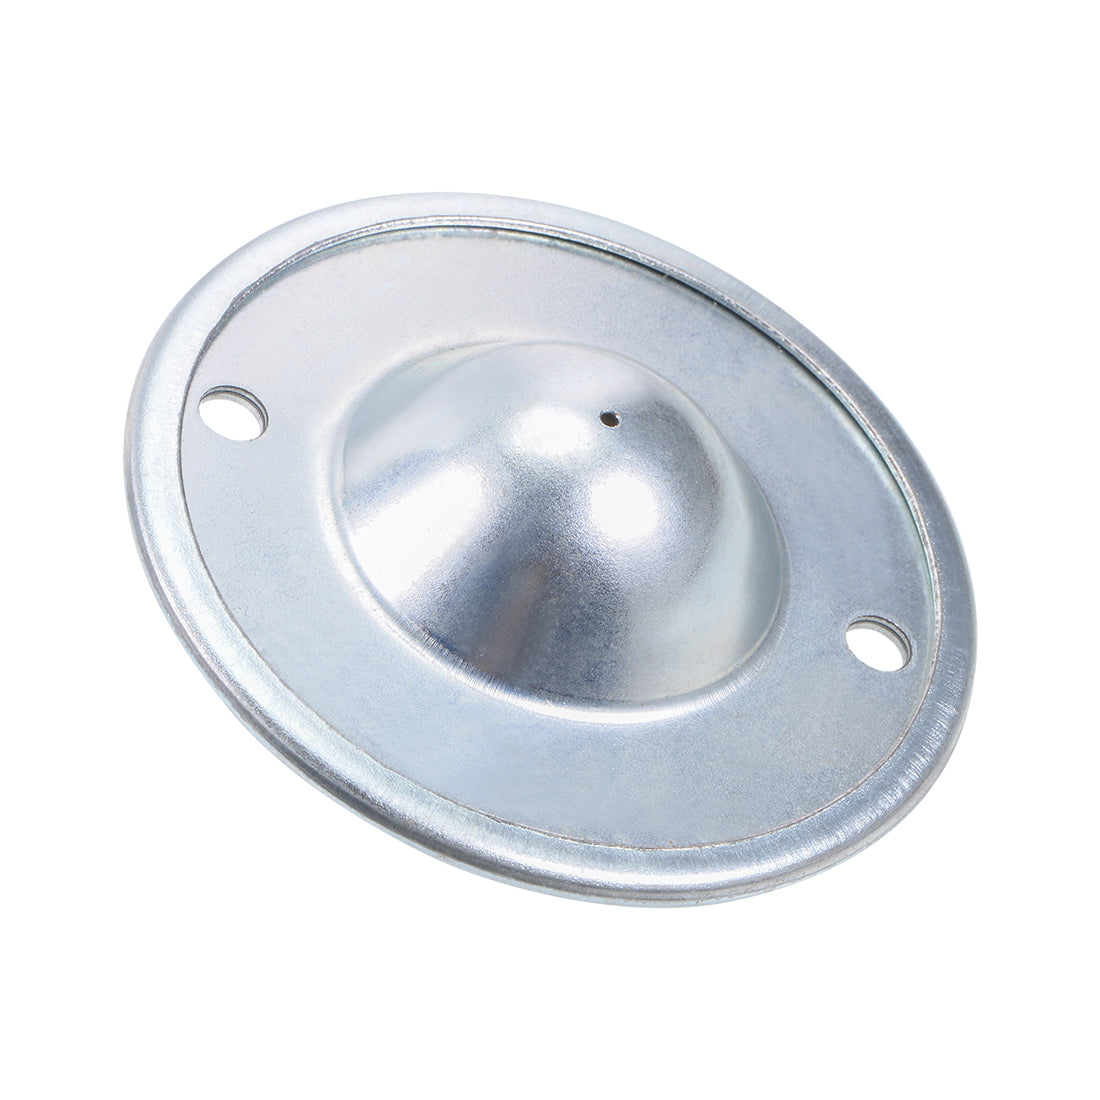 uxcell Uxcell Ball Transfers Bearing Unit CY-25B 1" Diameter, Flying Saucer Mounted, Nylon Ball, 99lbs Load Capacity